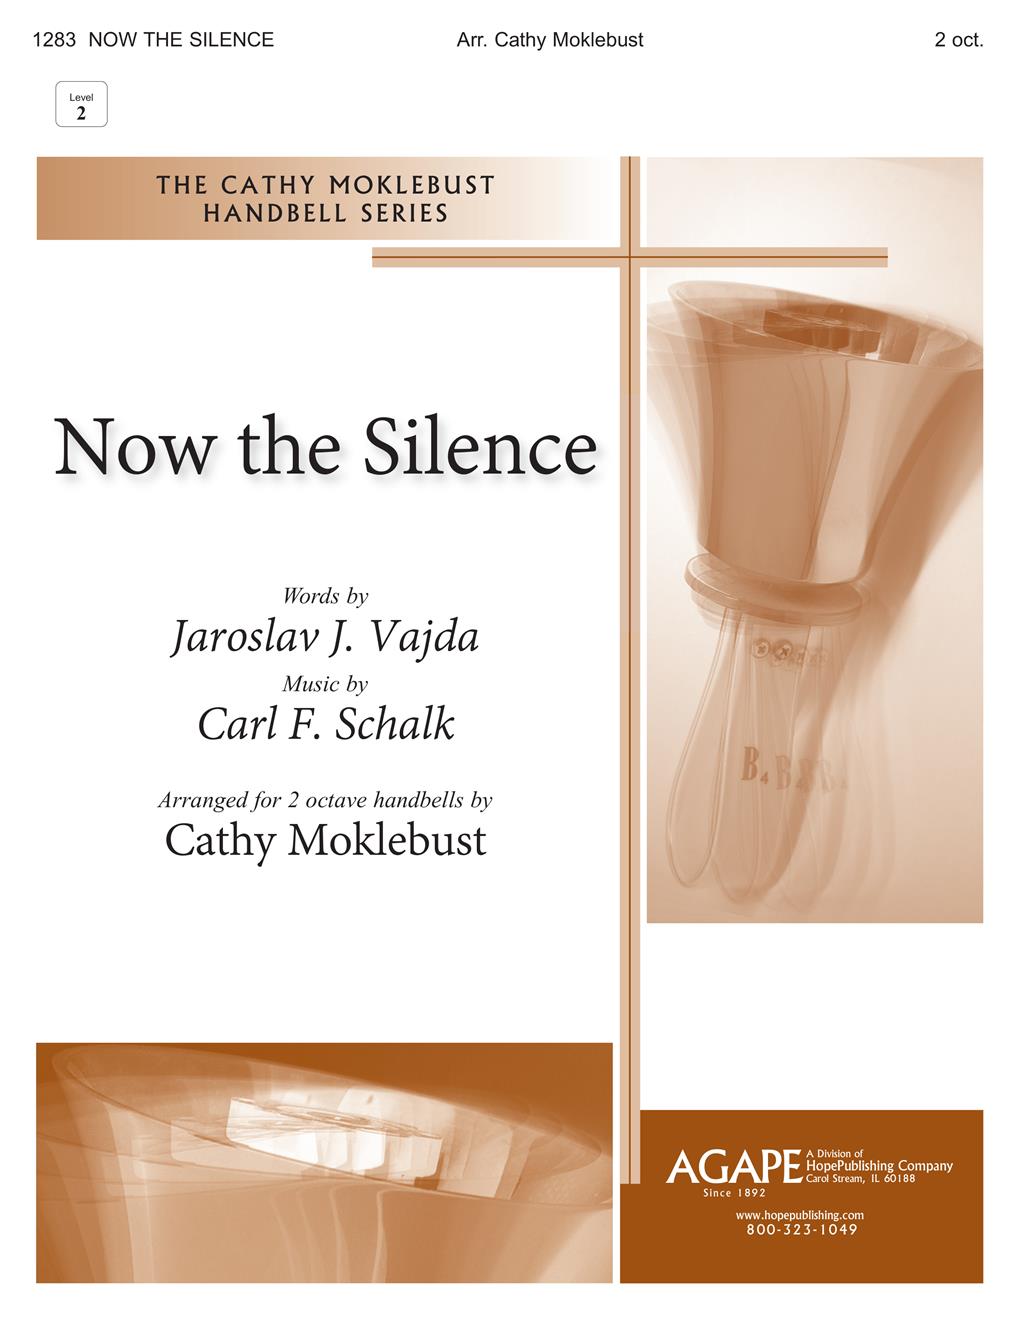 Now the Silence - 2 oct. Cover Image